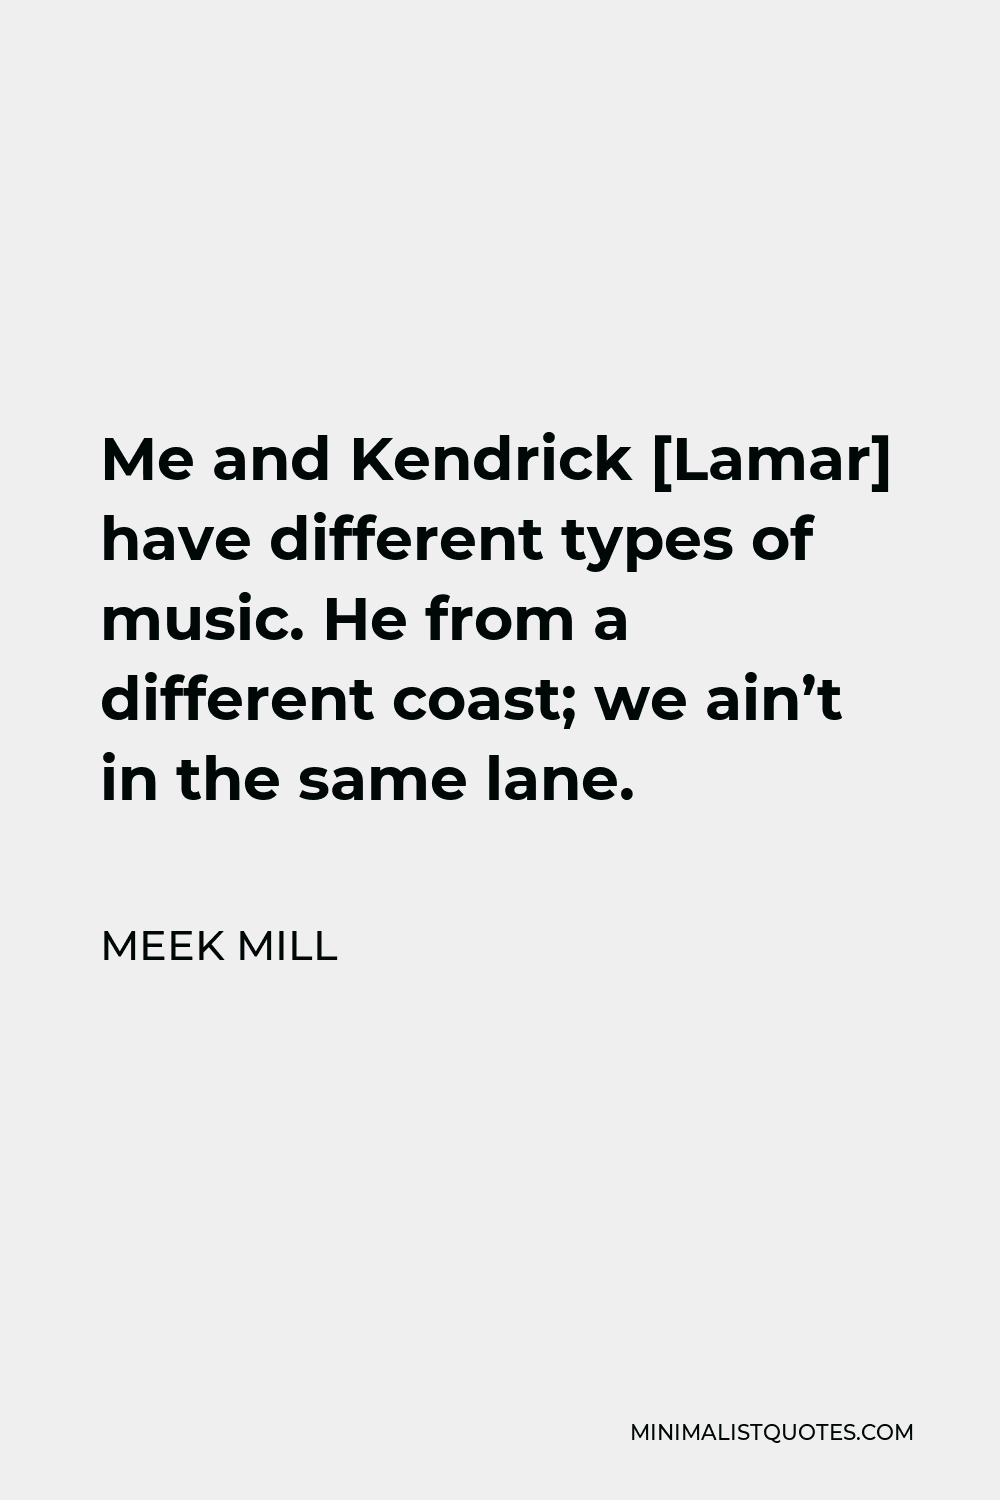 Meek Mill Quote - Me and Kendrick [Lamar] have different types of music. He from a different coast; we ain’t in the same lane.